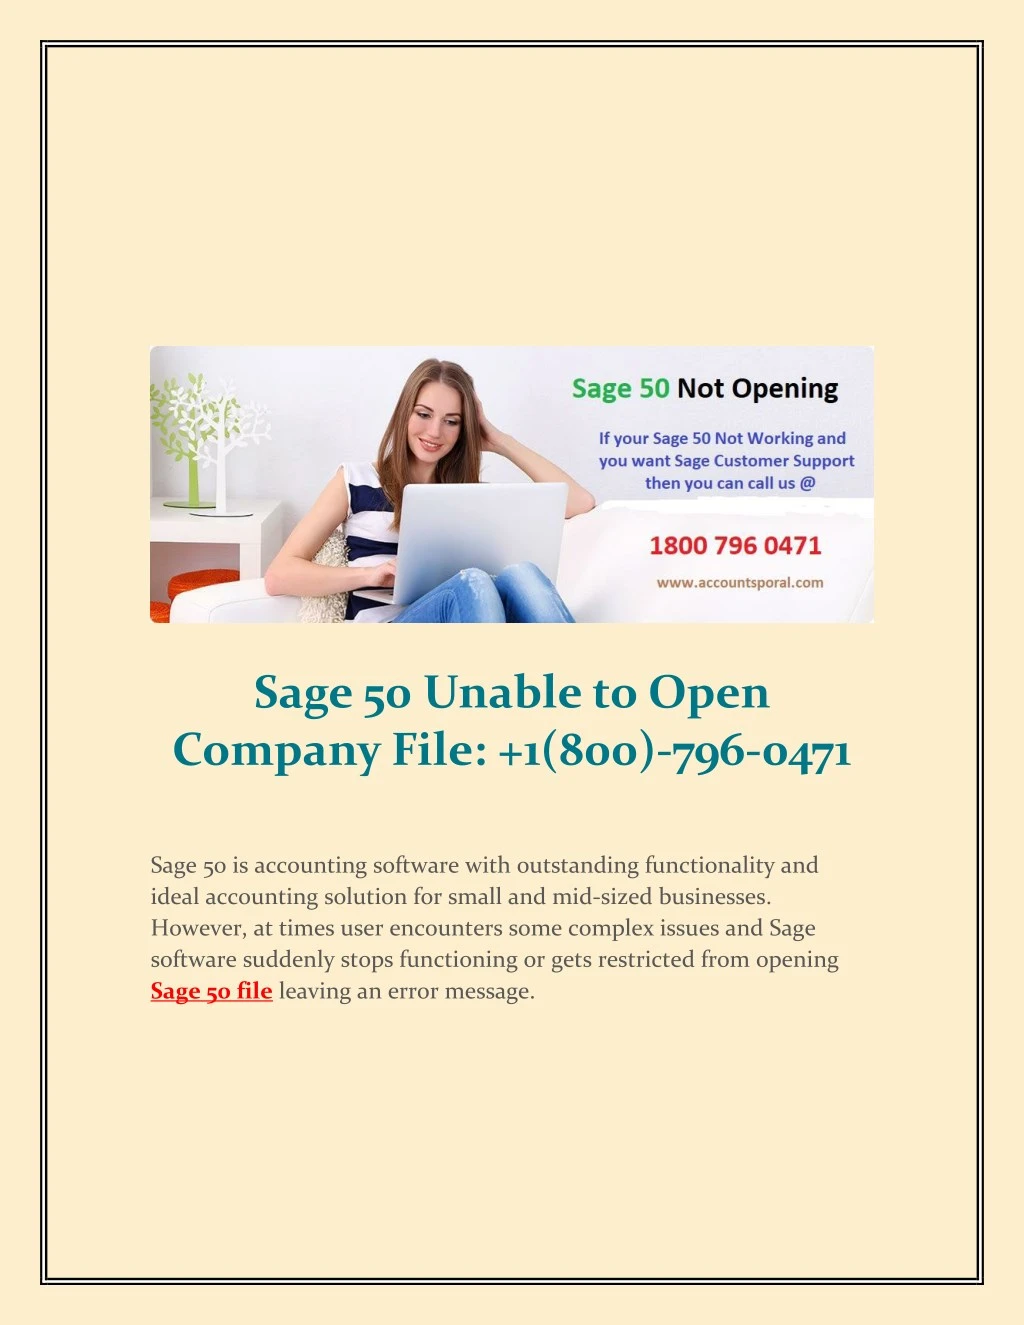 sage 50 unable to open company file 1 800 796 0471